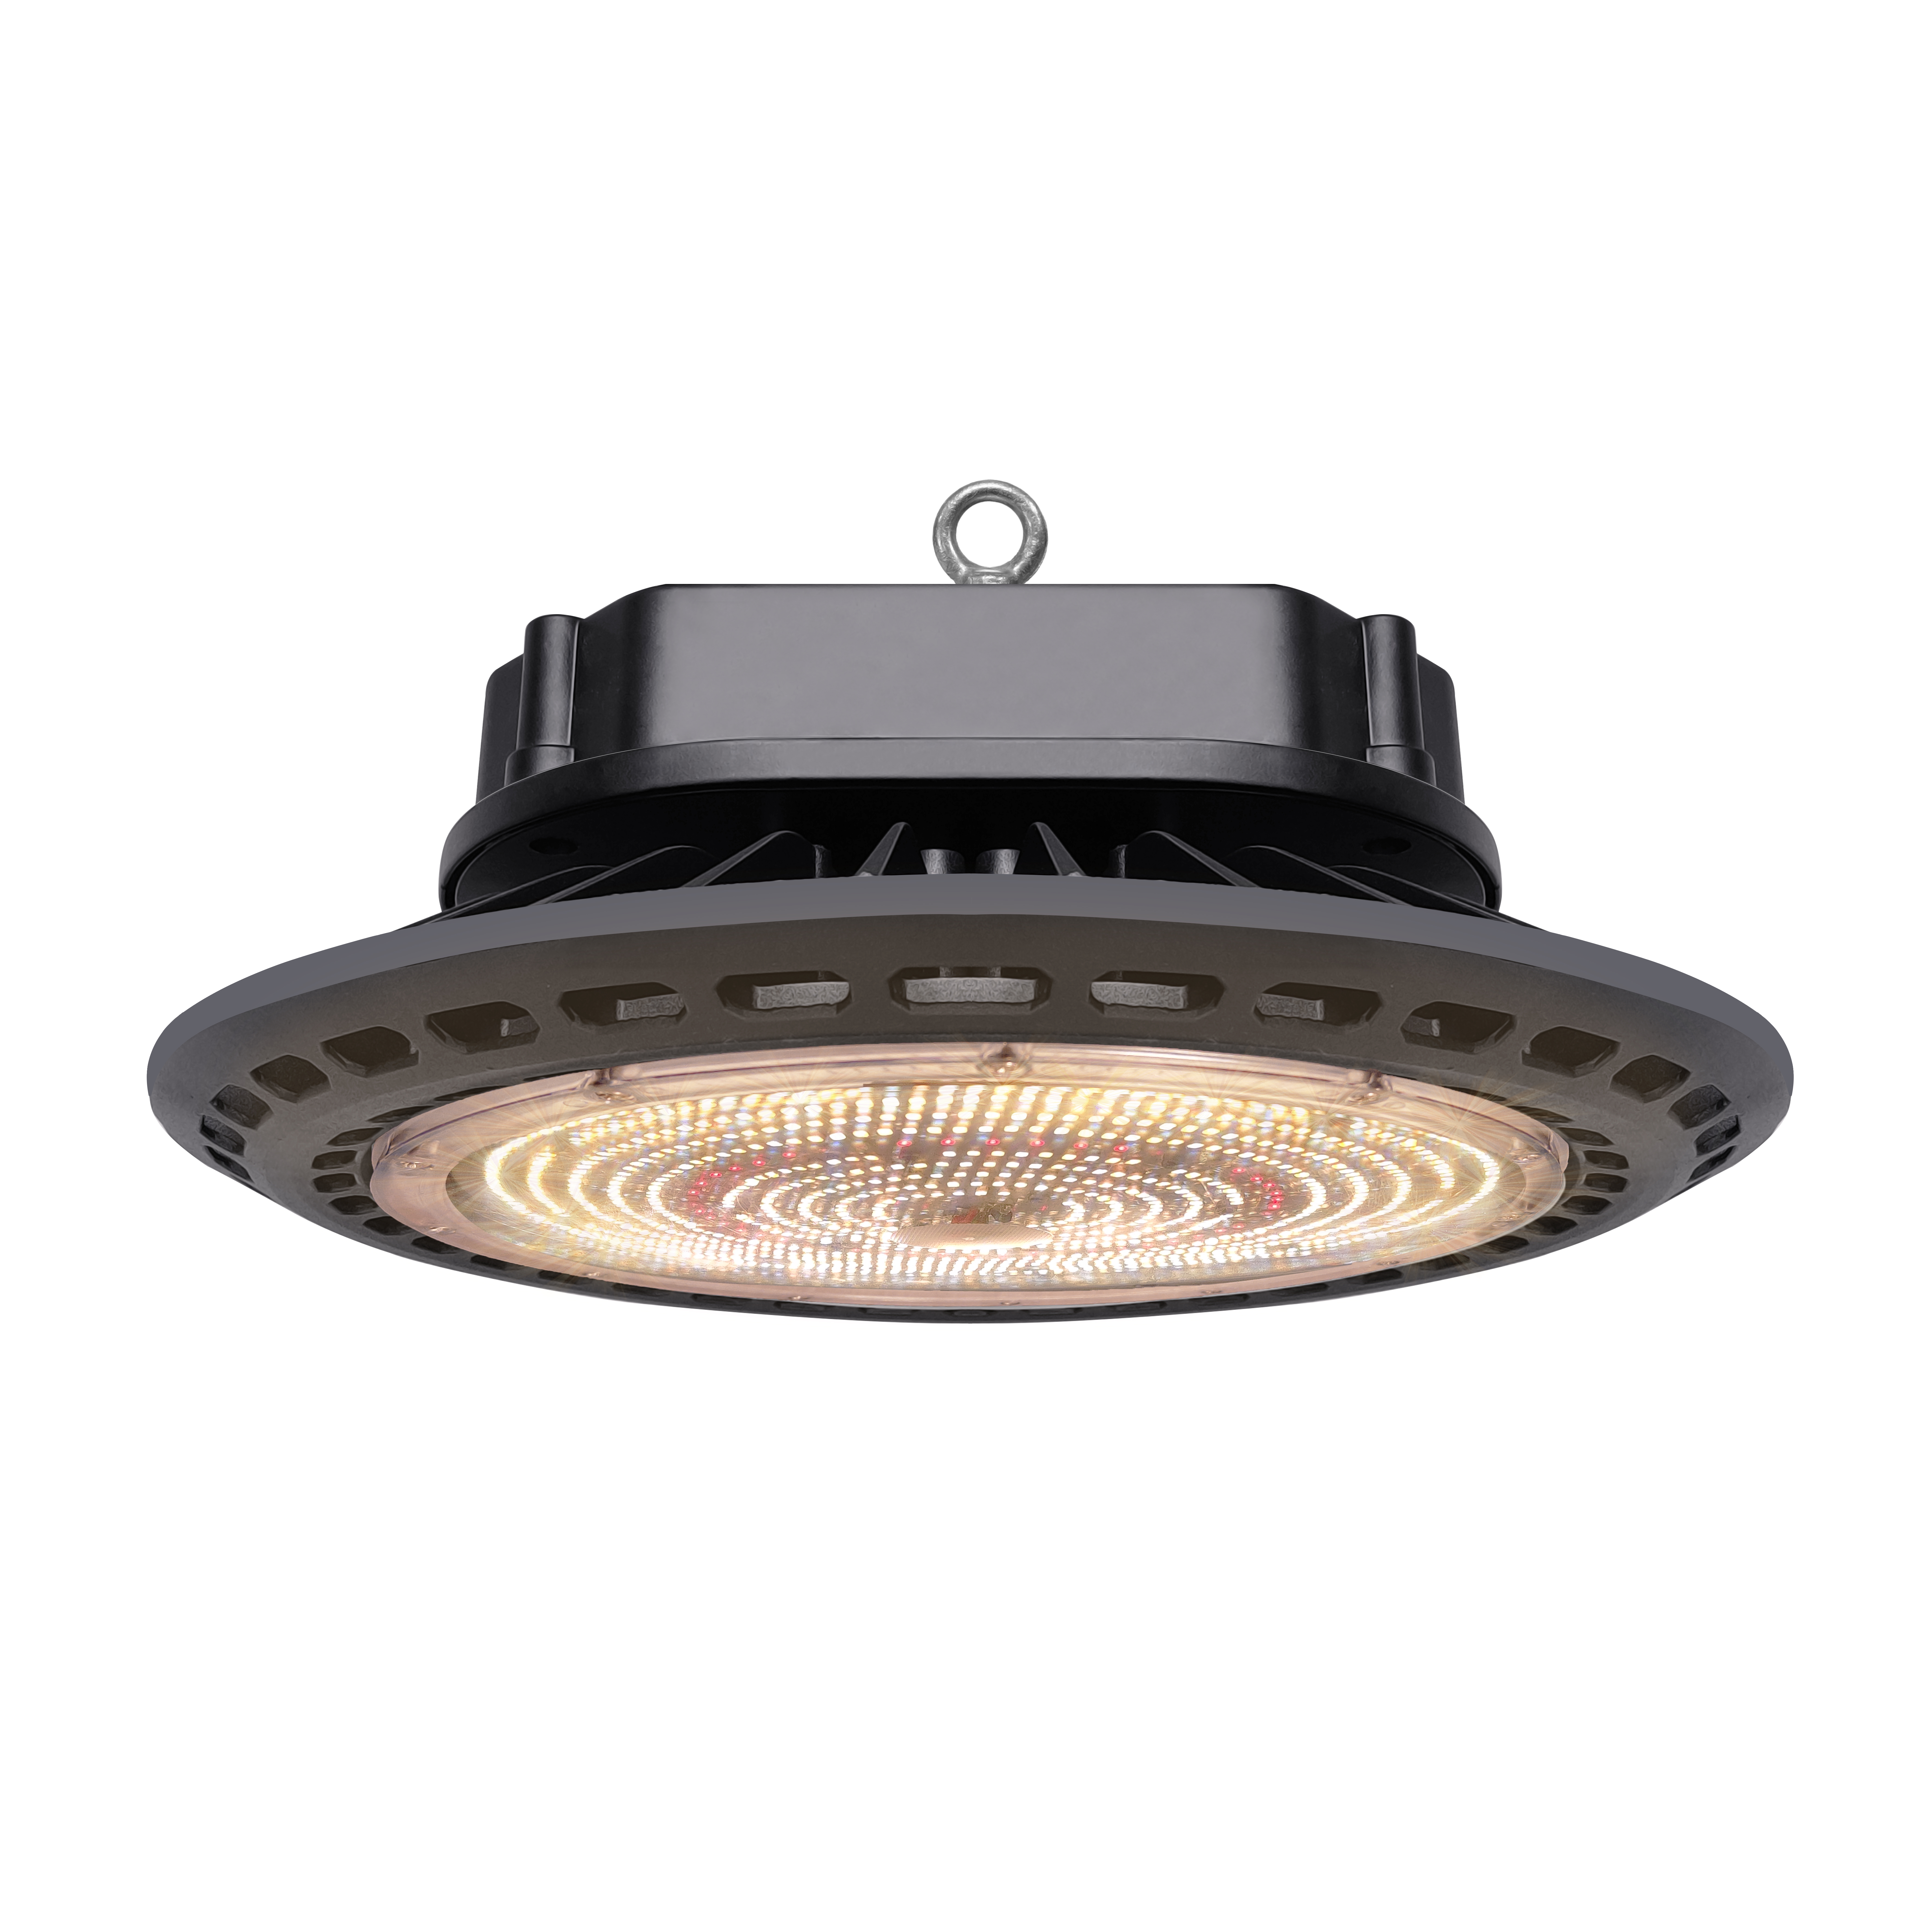 LED 300 W UFO with 10 V Dimmer & ext cord